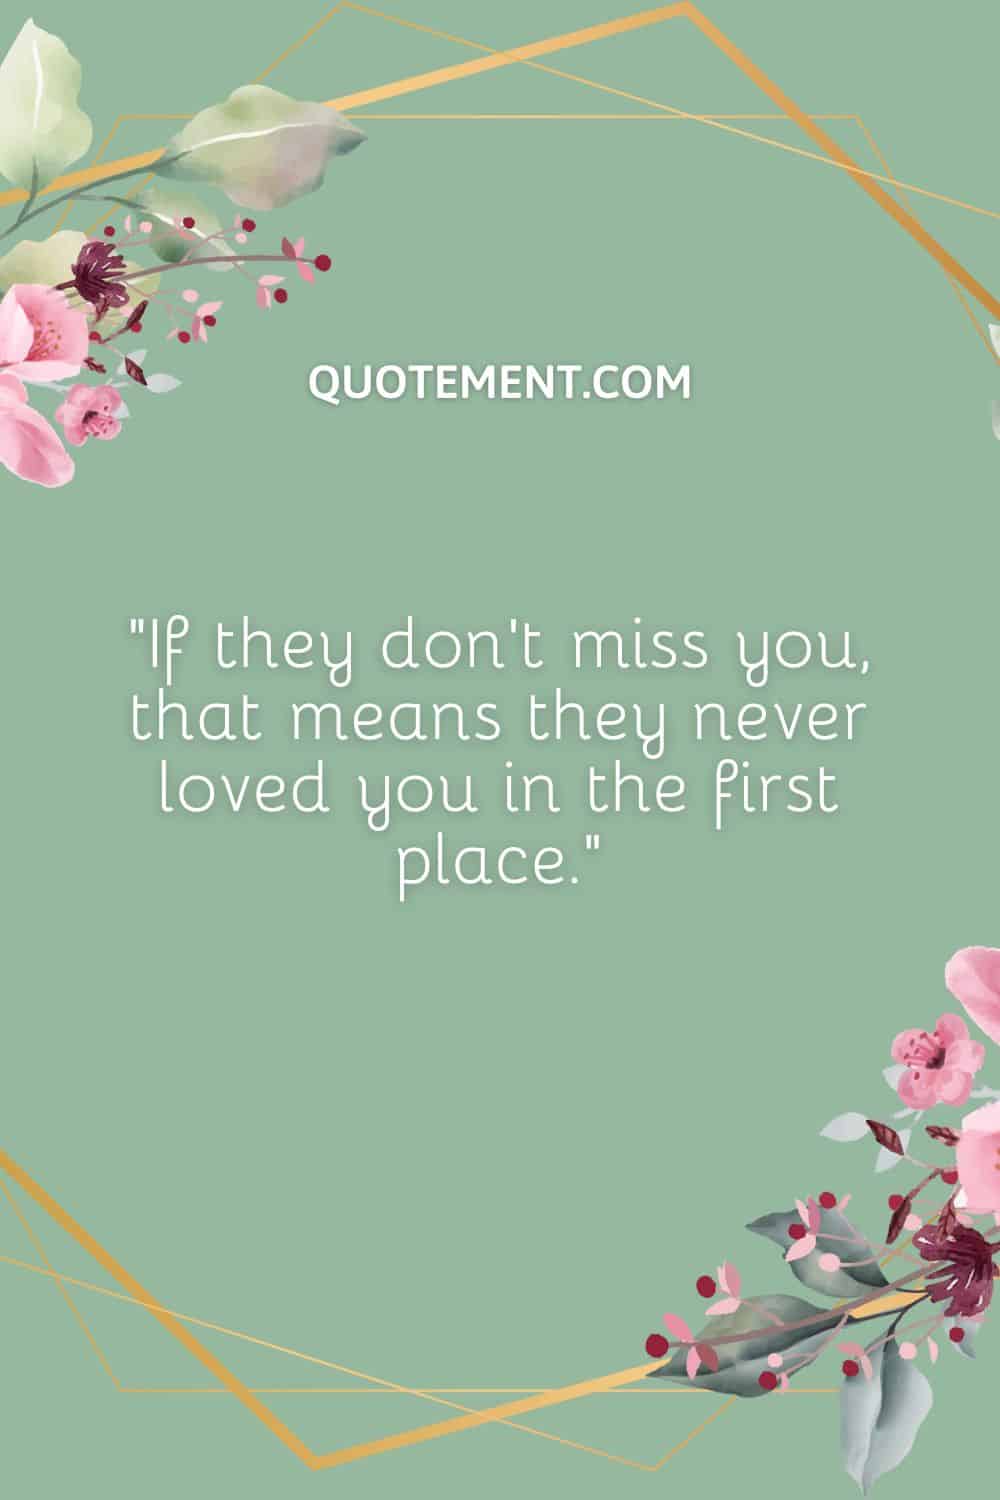 If they don’t miss you, that means they never loved you in the first place